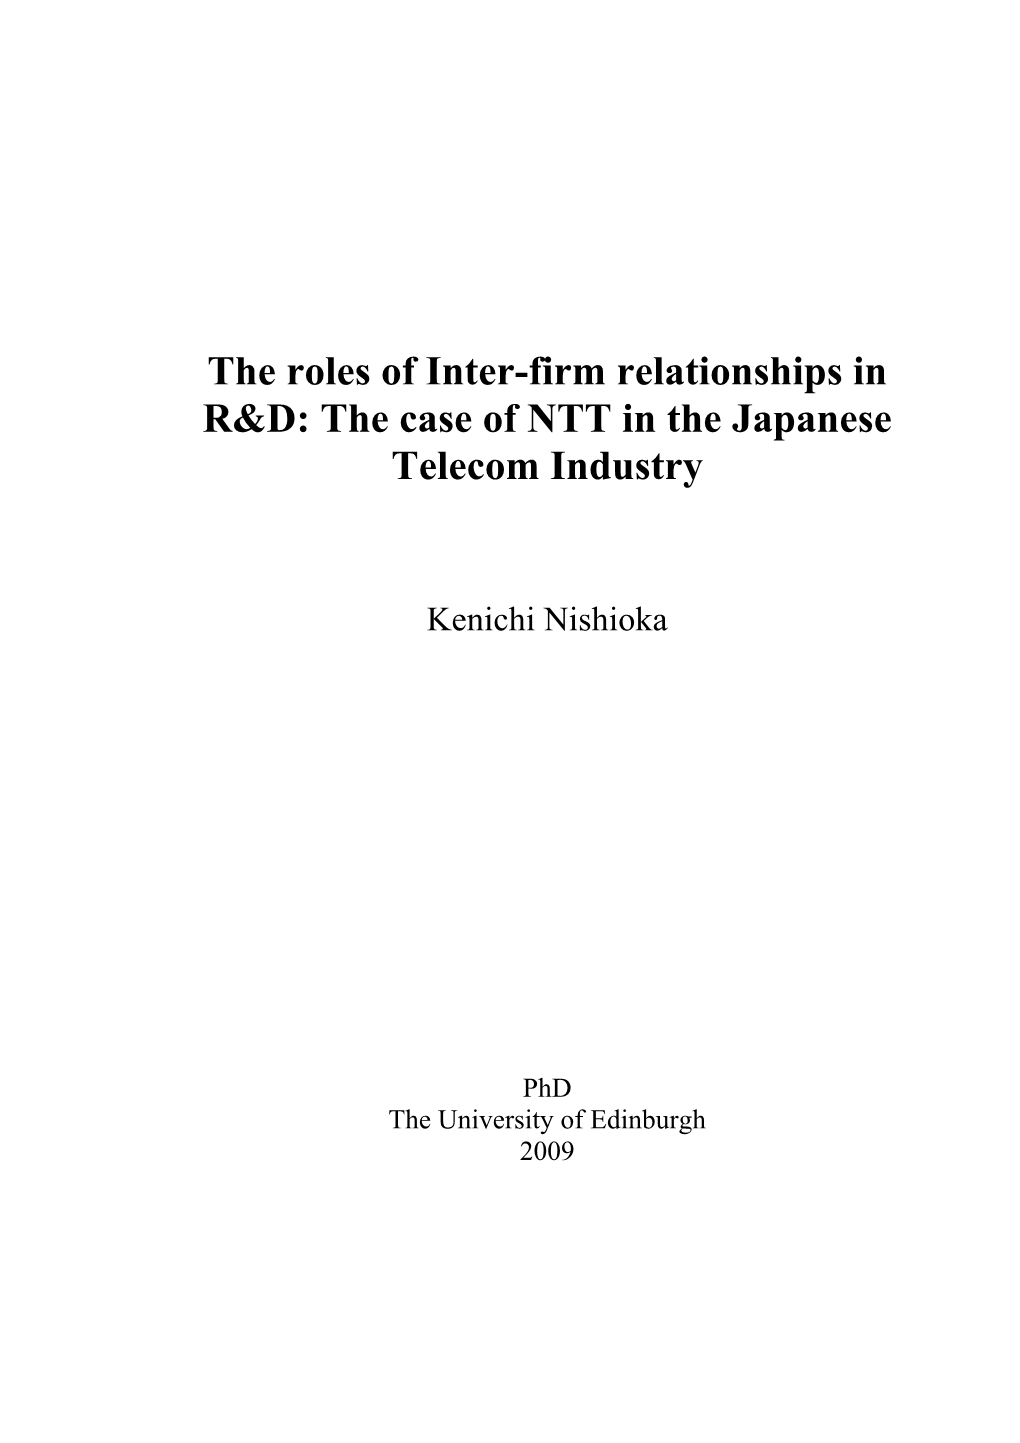 The Roles of Inter-Firm Relationships in R&D: the Case of NTT in The